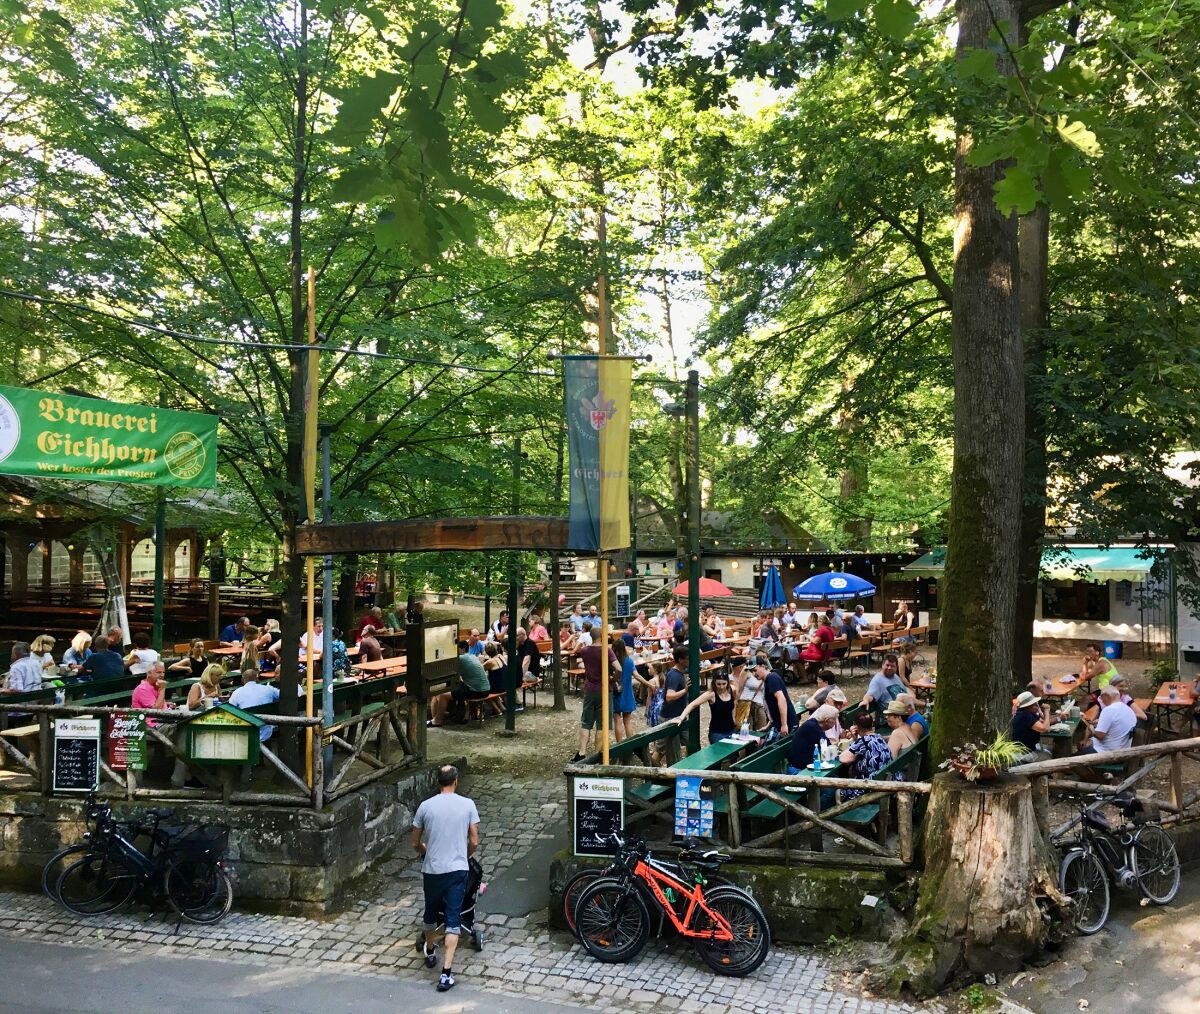 People gather at the Eichhorn Keller beer garden in the northern Bavaria town of Forchheim, Germany.